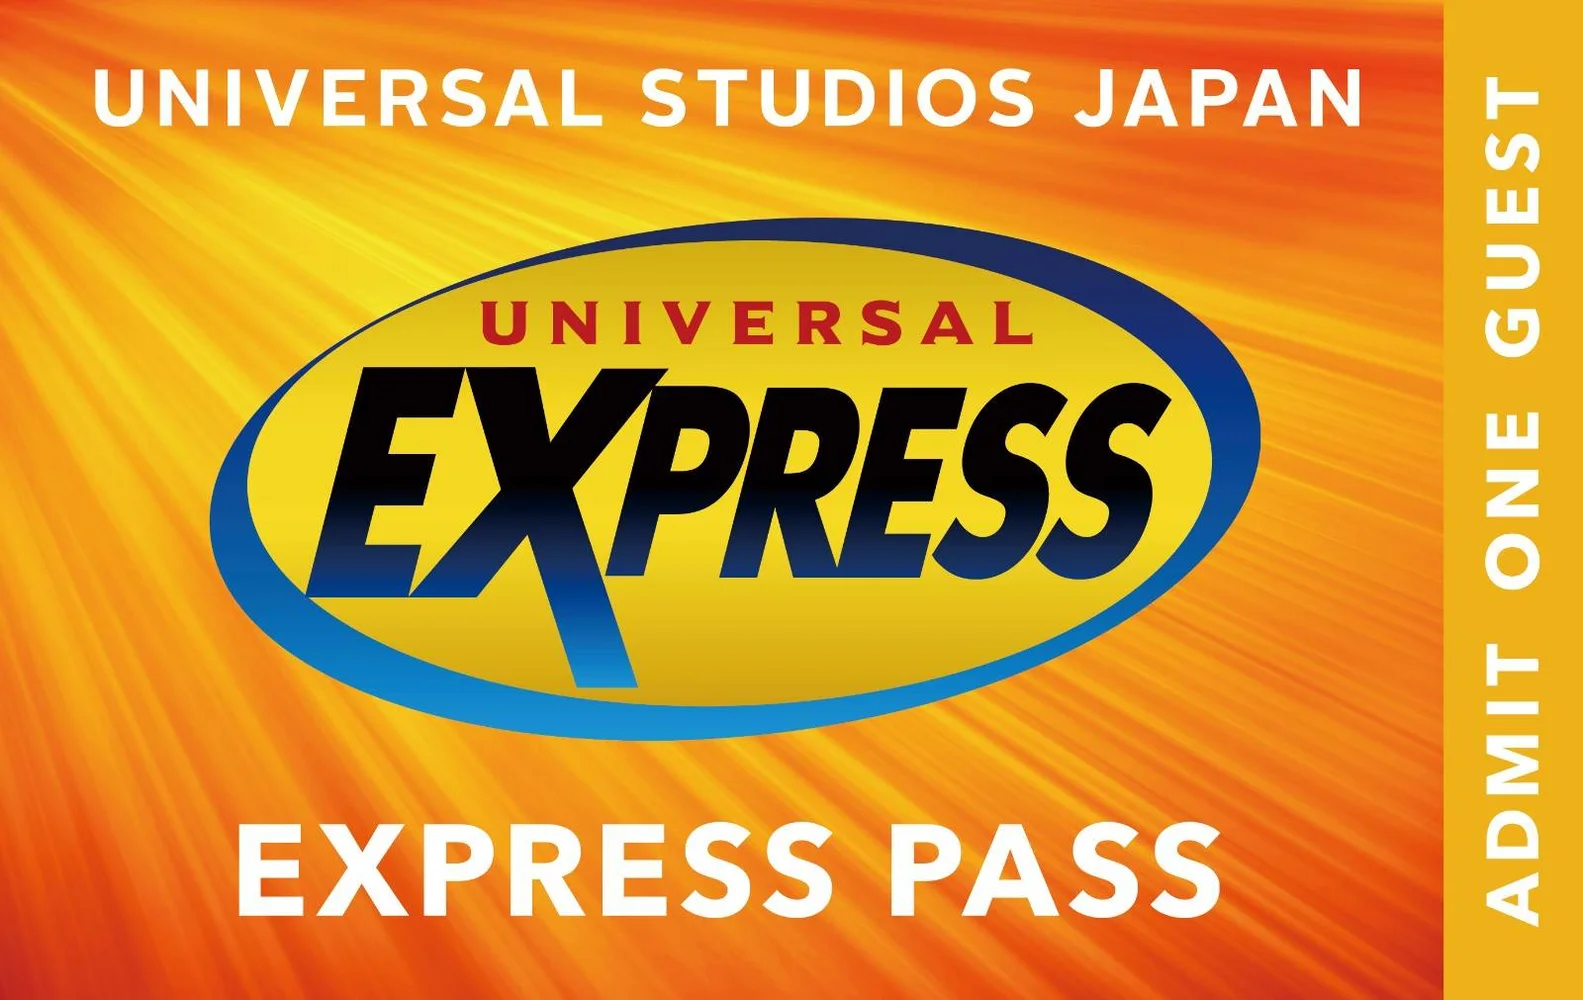 Universal Express Pass 7 — Attack on Titan XR Ride & SING on Tour